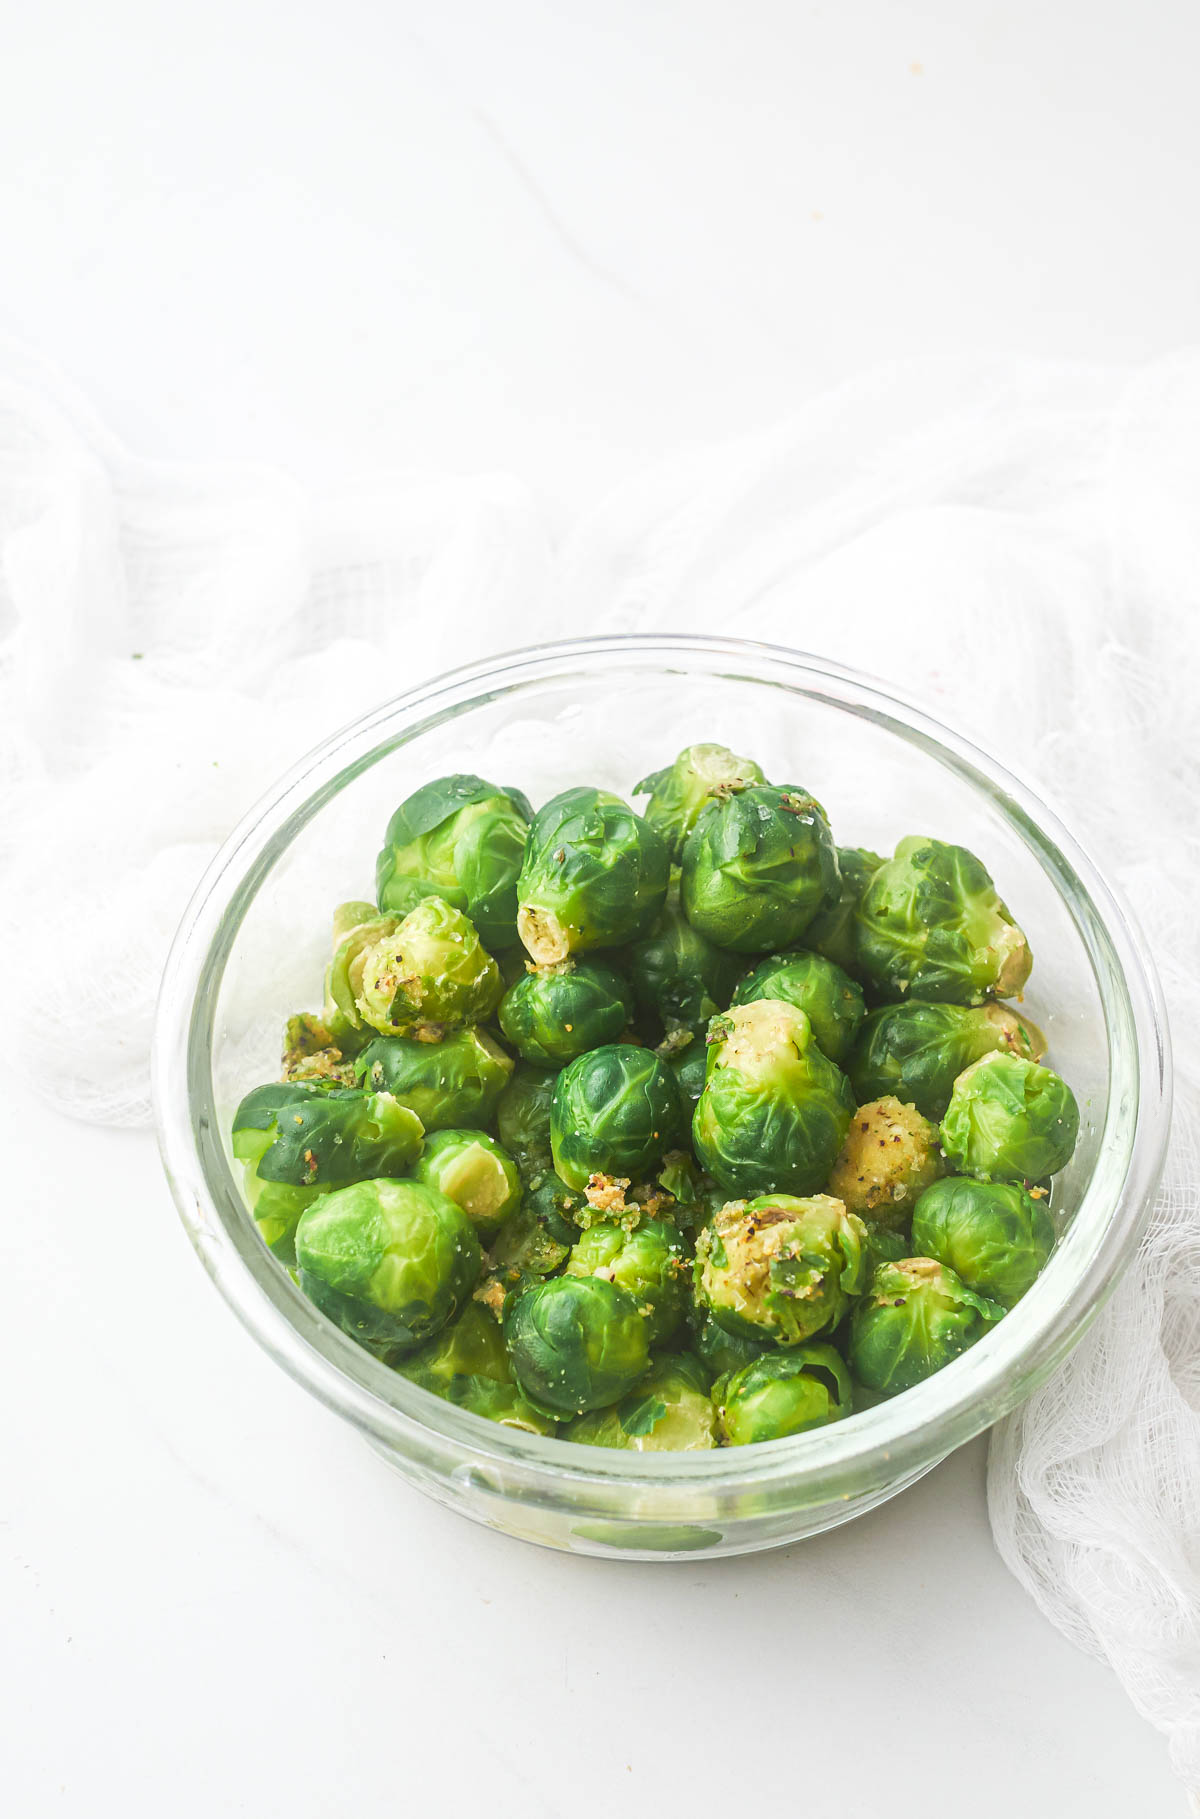 a bowl of cooked brussel sprouts from the how to cook frozen brussel sprouts recipe